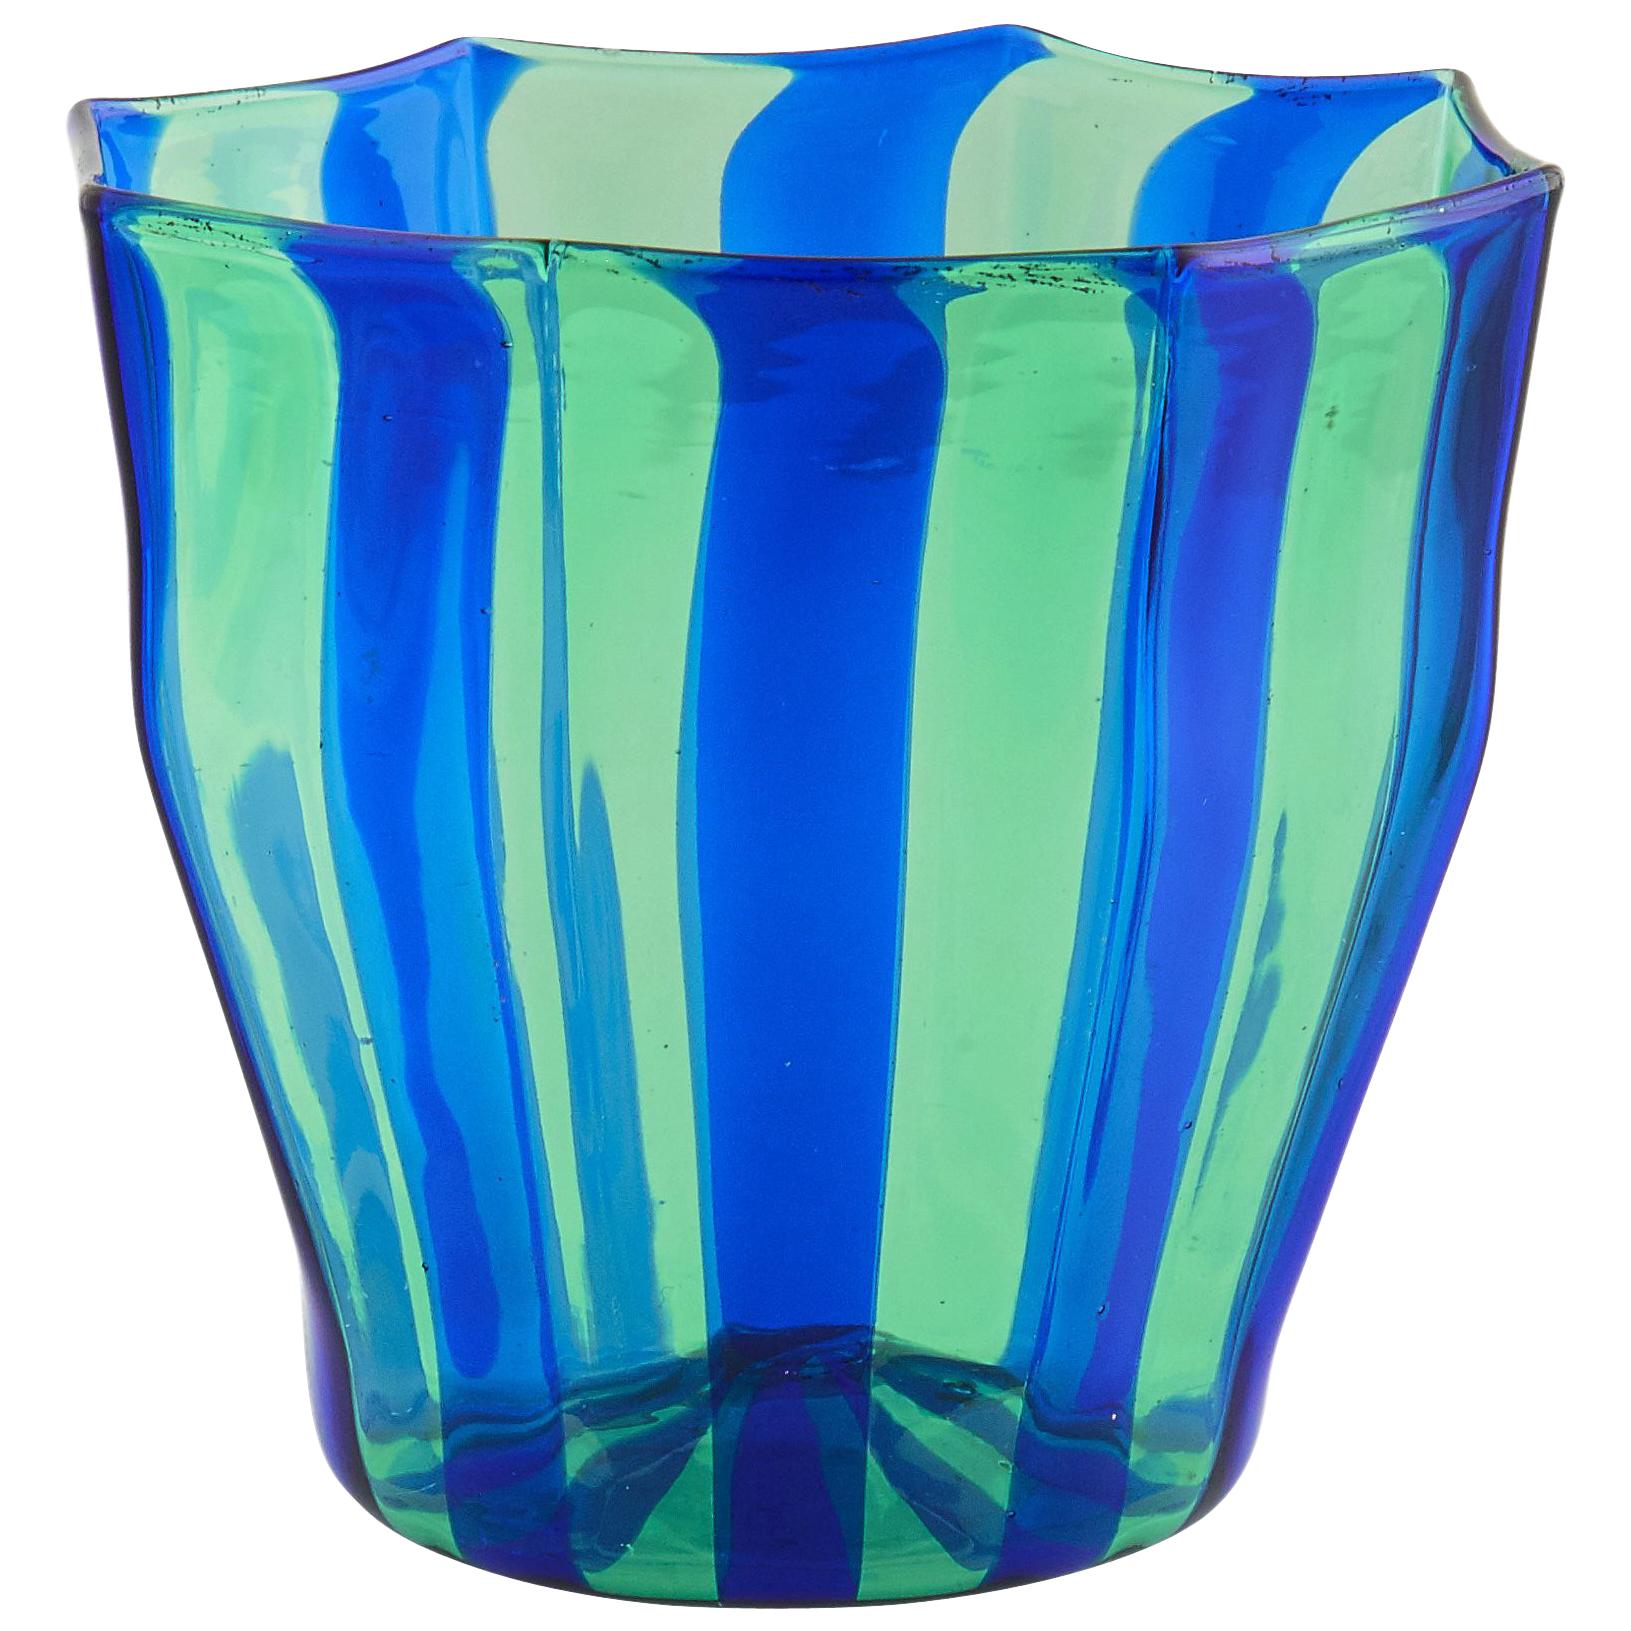 Campbell-Rey continue their exploration of color and geometric form, introducing new expressions to traditional materials. Presenting Rosanna, a Murano glassware collection comprised of an octagonal tumbler and carafe available in five striped